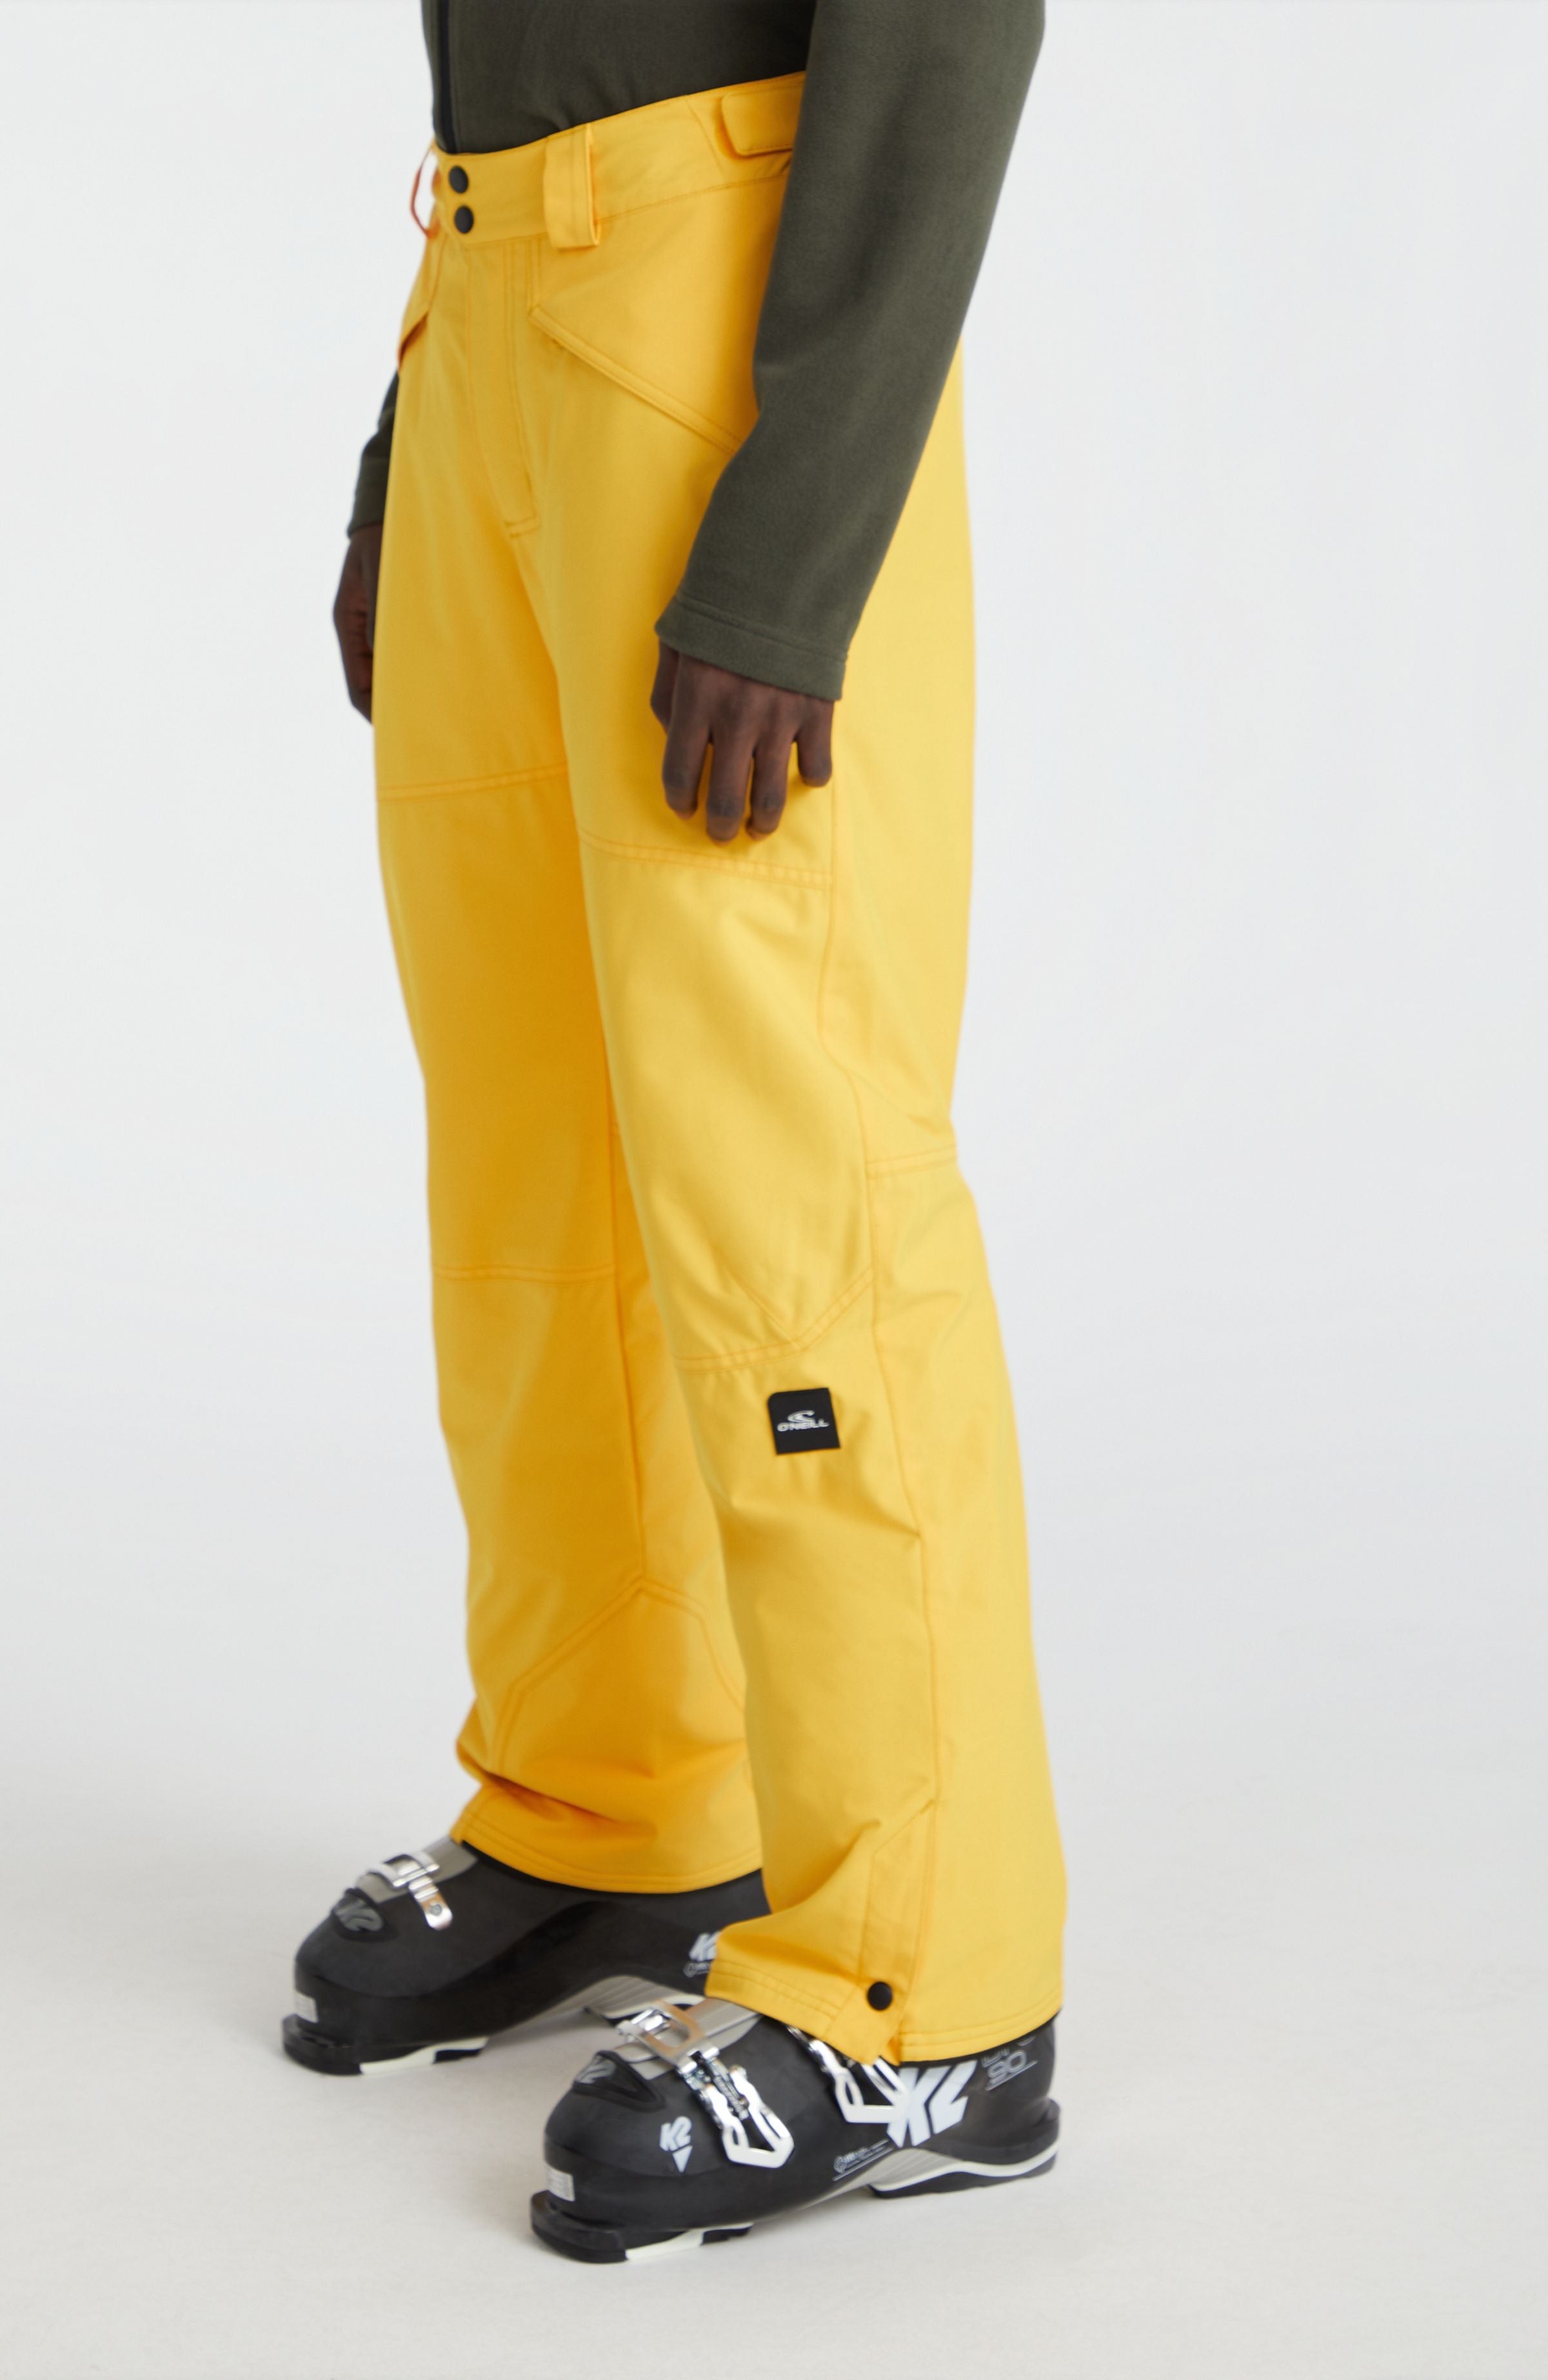 Gerry Snowflake 4-Way Stretch Soft Shell Snow Pants - Save 61%